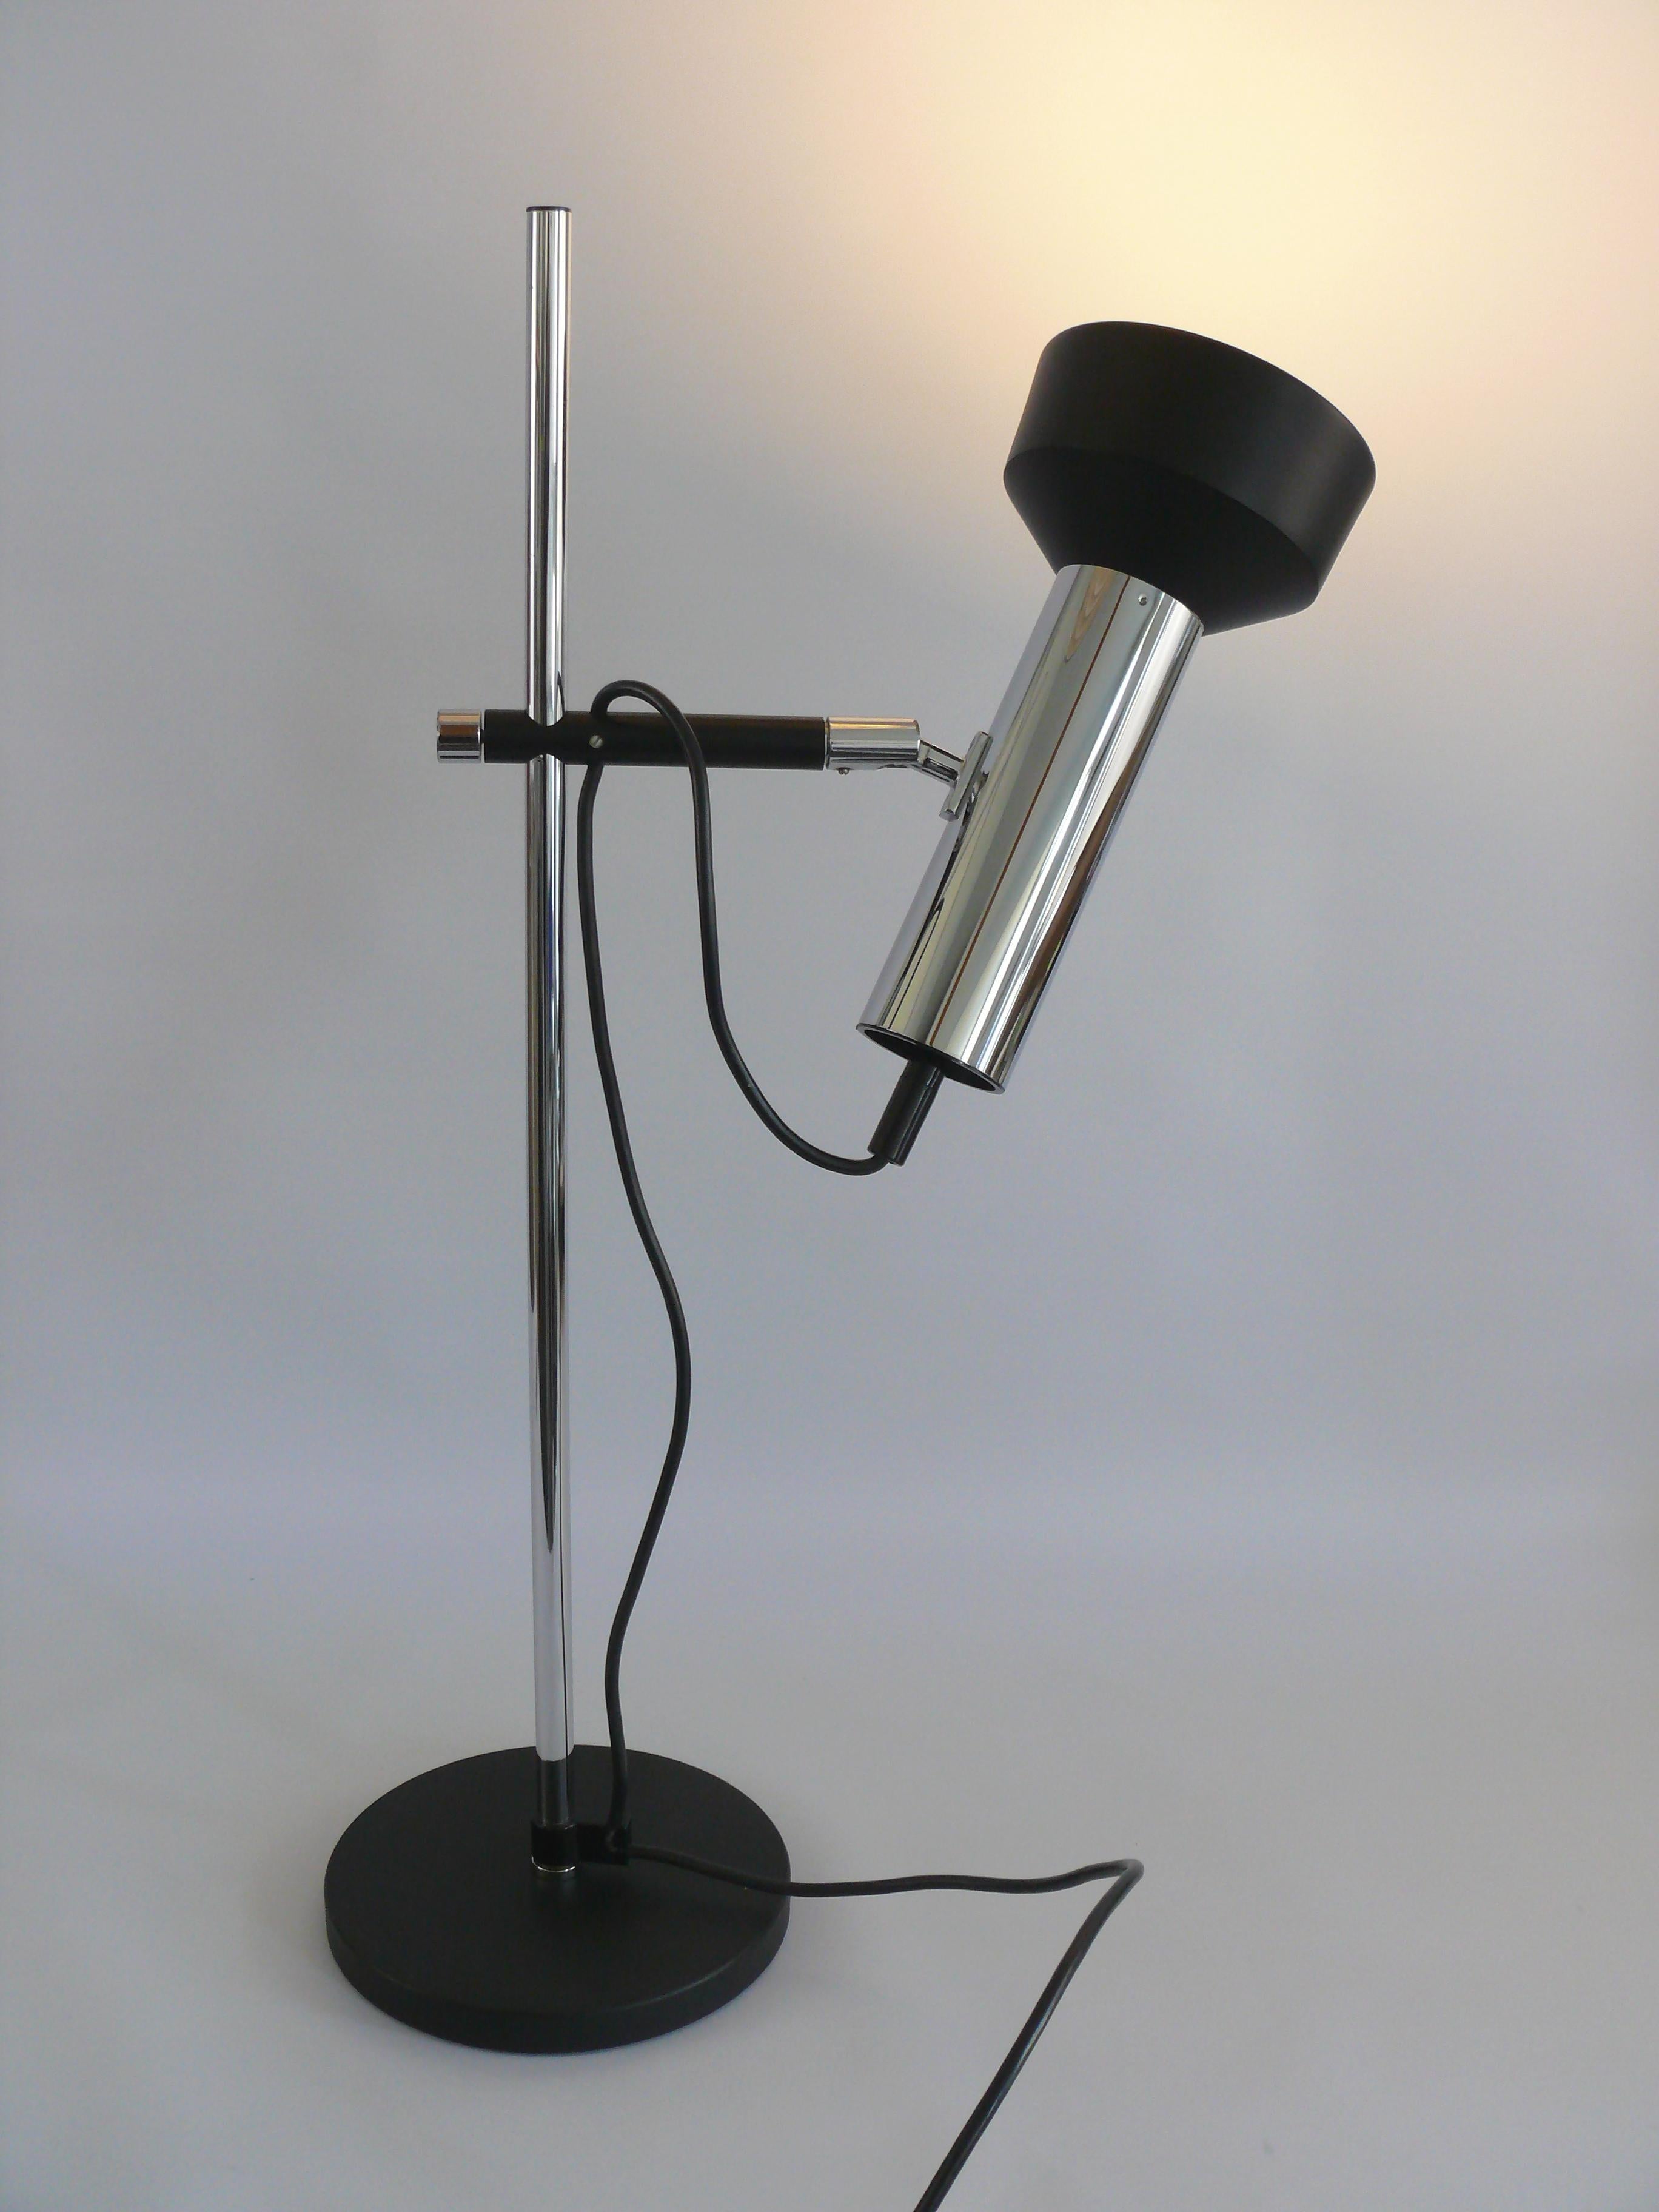 Solid bar lamp from the 1960s by the company Staff Leuchten, type L 401. The company Staff from Lemgo stood for high-quality, modern lamp design. The lamp shows the typical design of the time with contrasts between chromed areas and matt lacquered